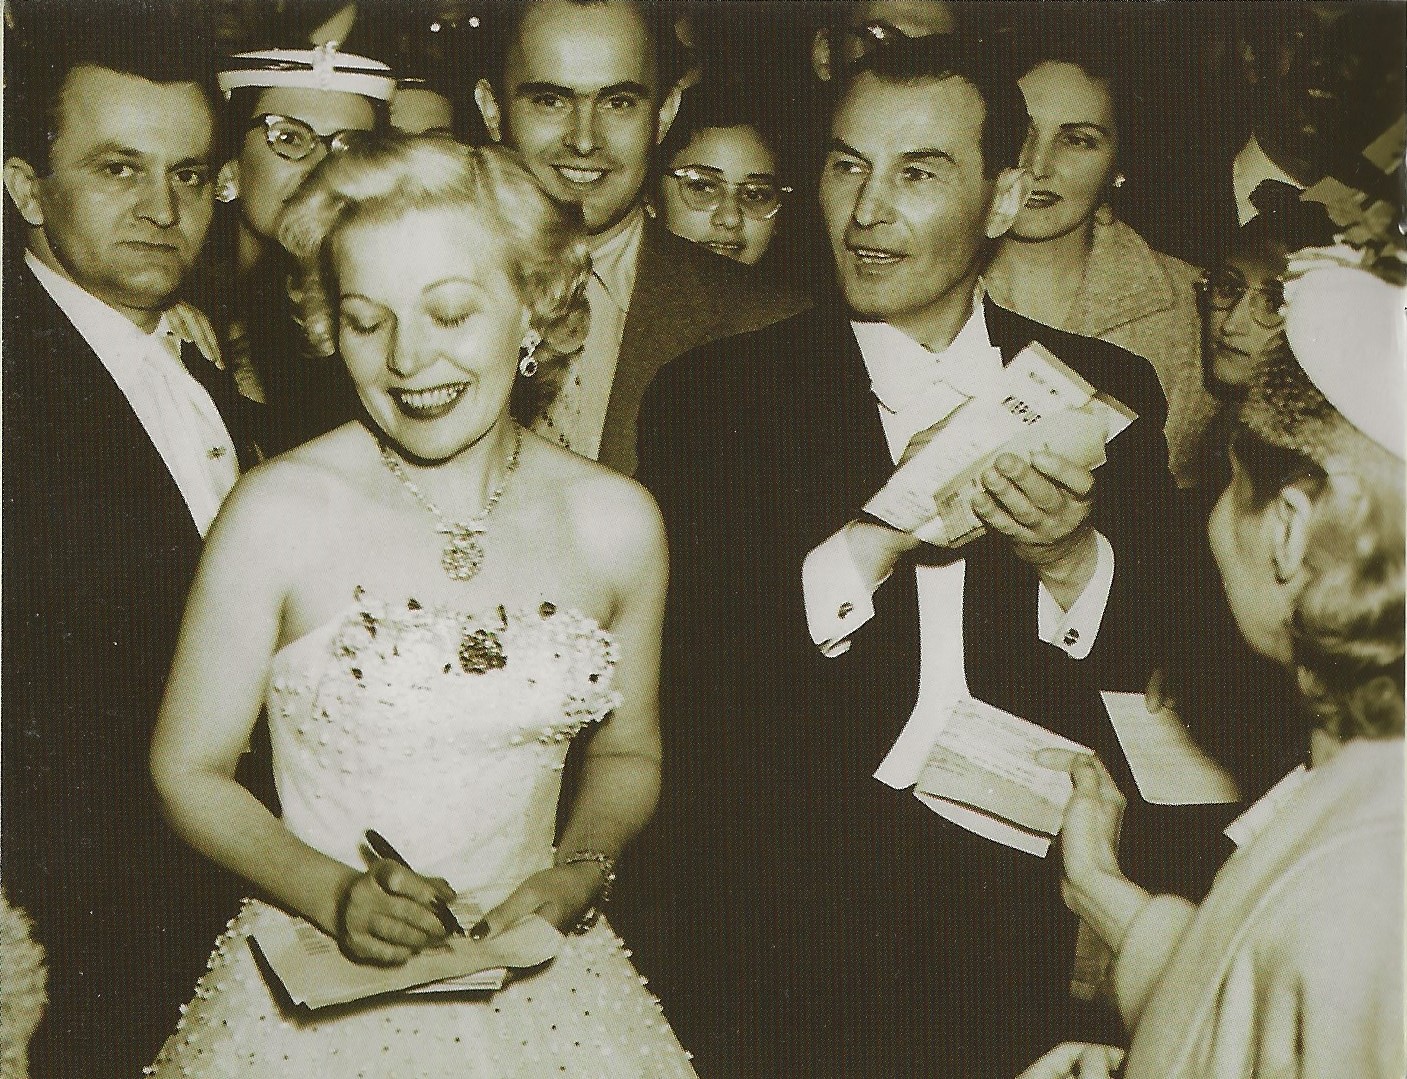 Marta Eggerth and Jan Kiepura giving autographs to fans in Detroit after a concert in 1954. (Photo: exil.arte)